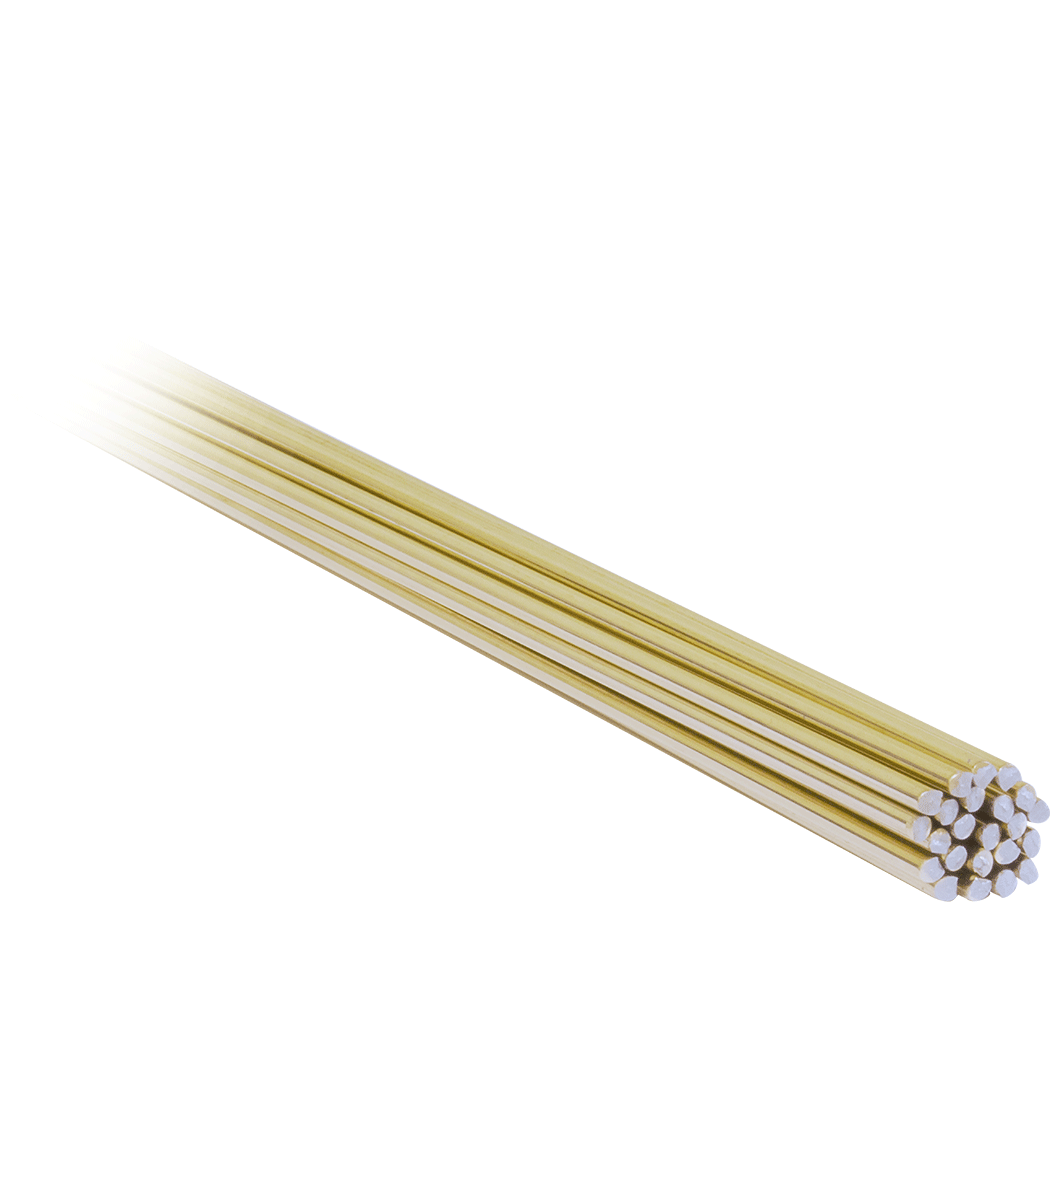 Wesbite Name: 34% Silver Brazing Rods